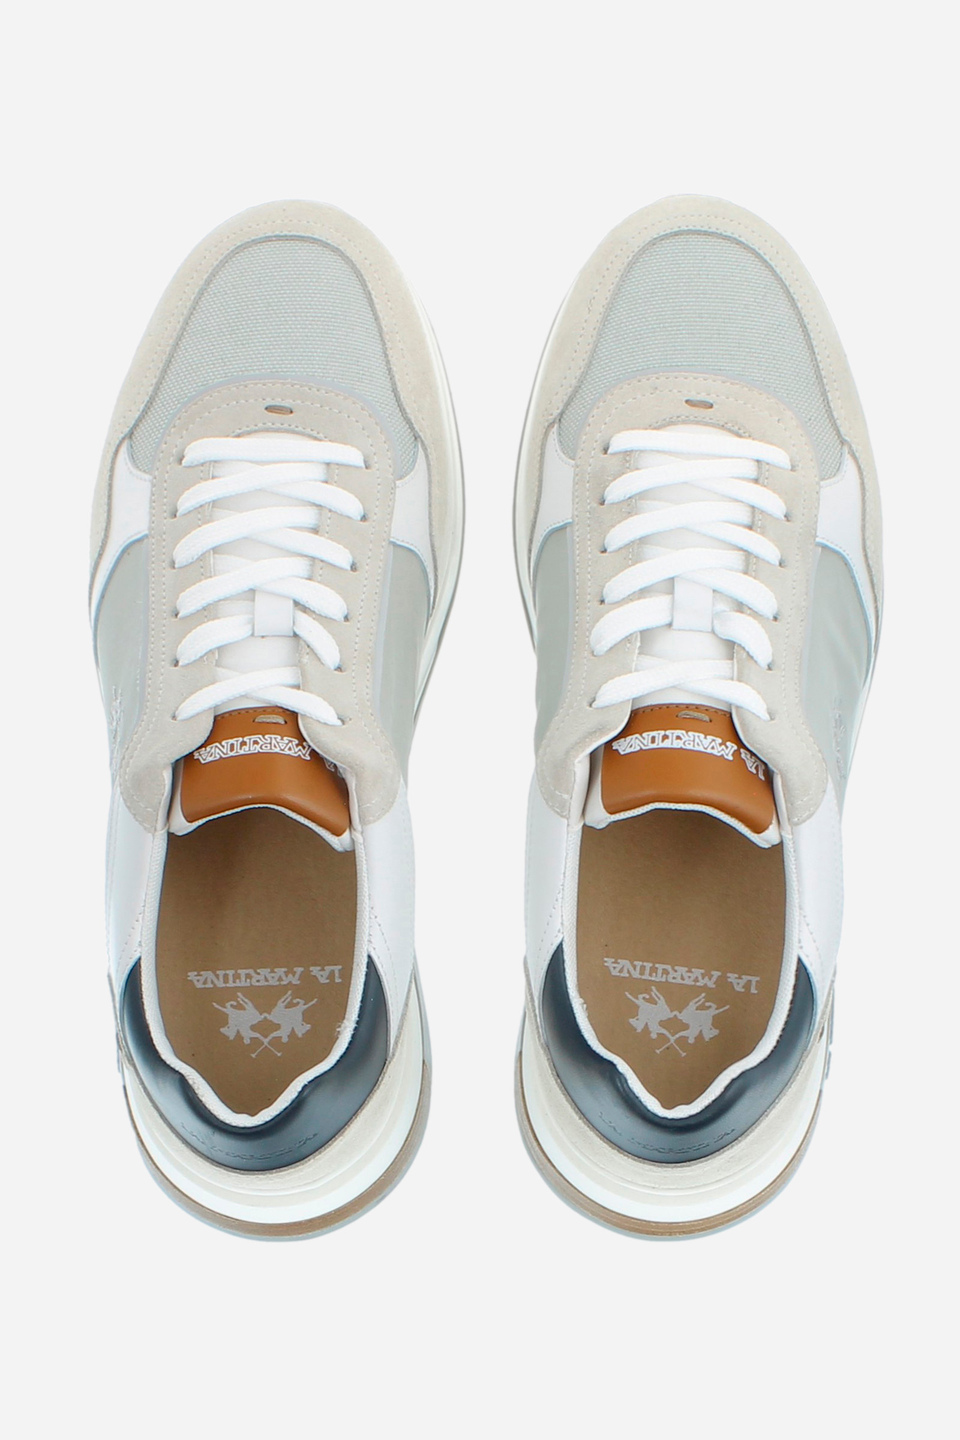 Men's trainers with raised sole in canvas and suede | La Martina - Official Online Shop